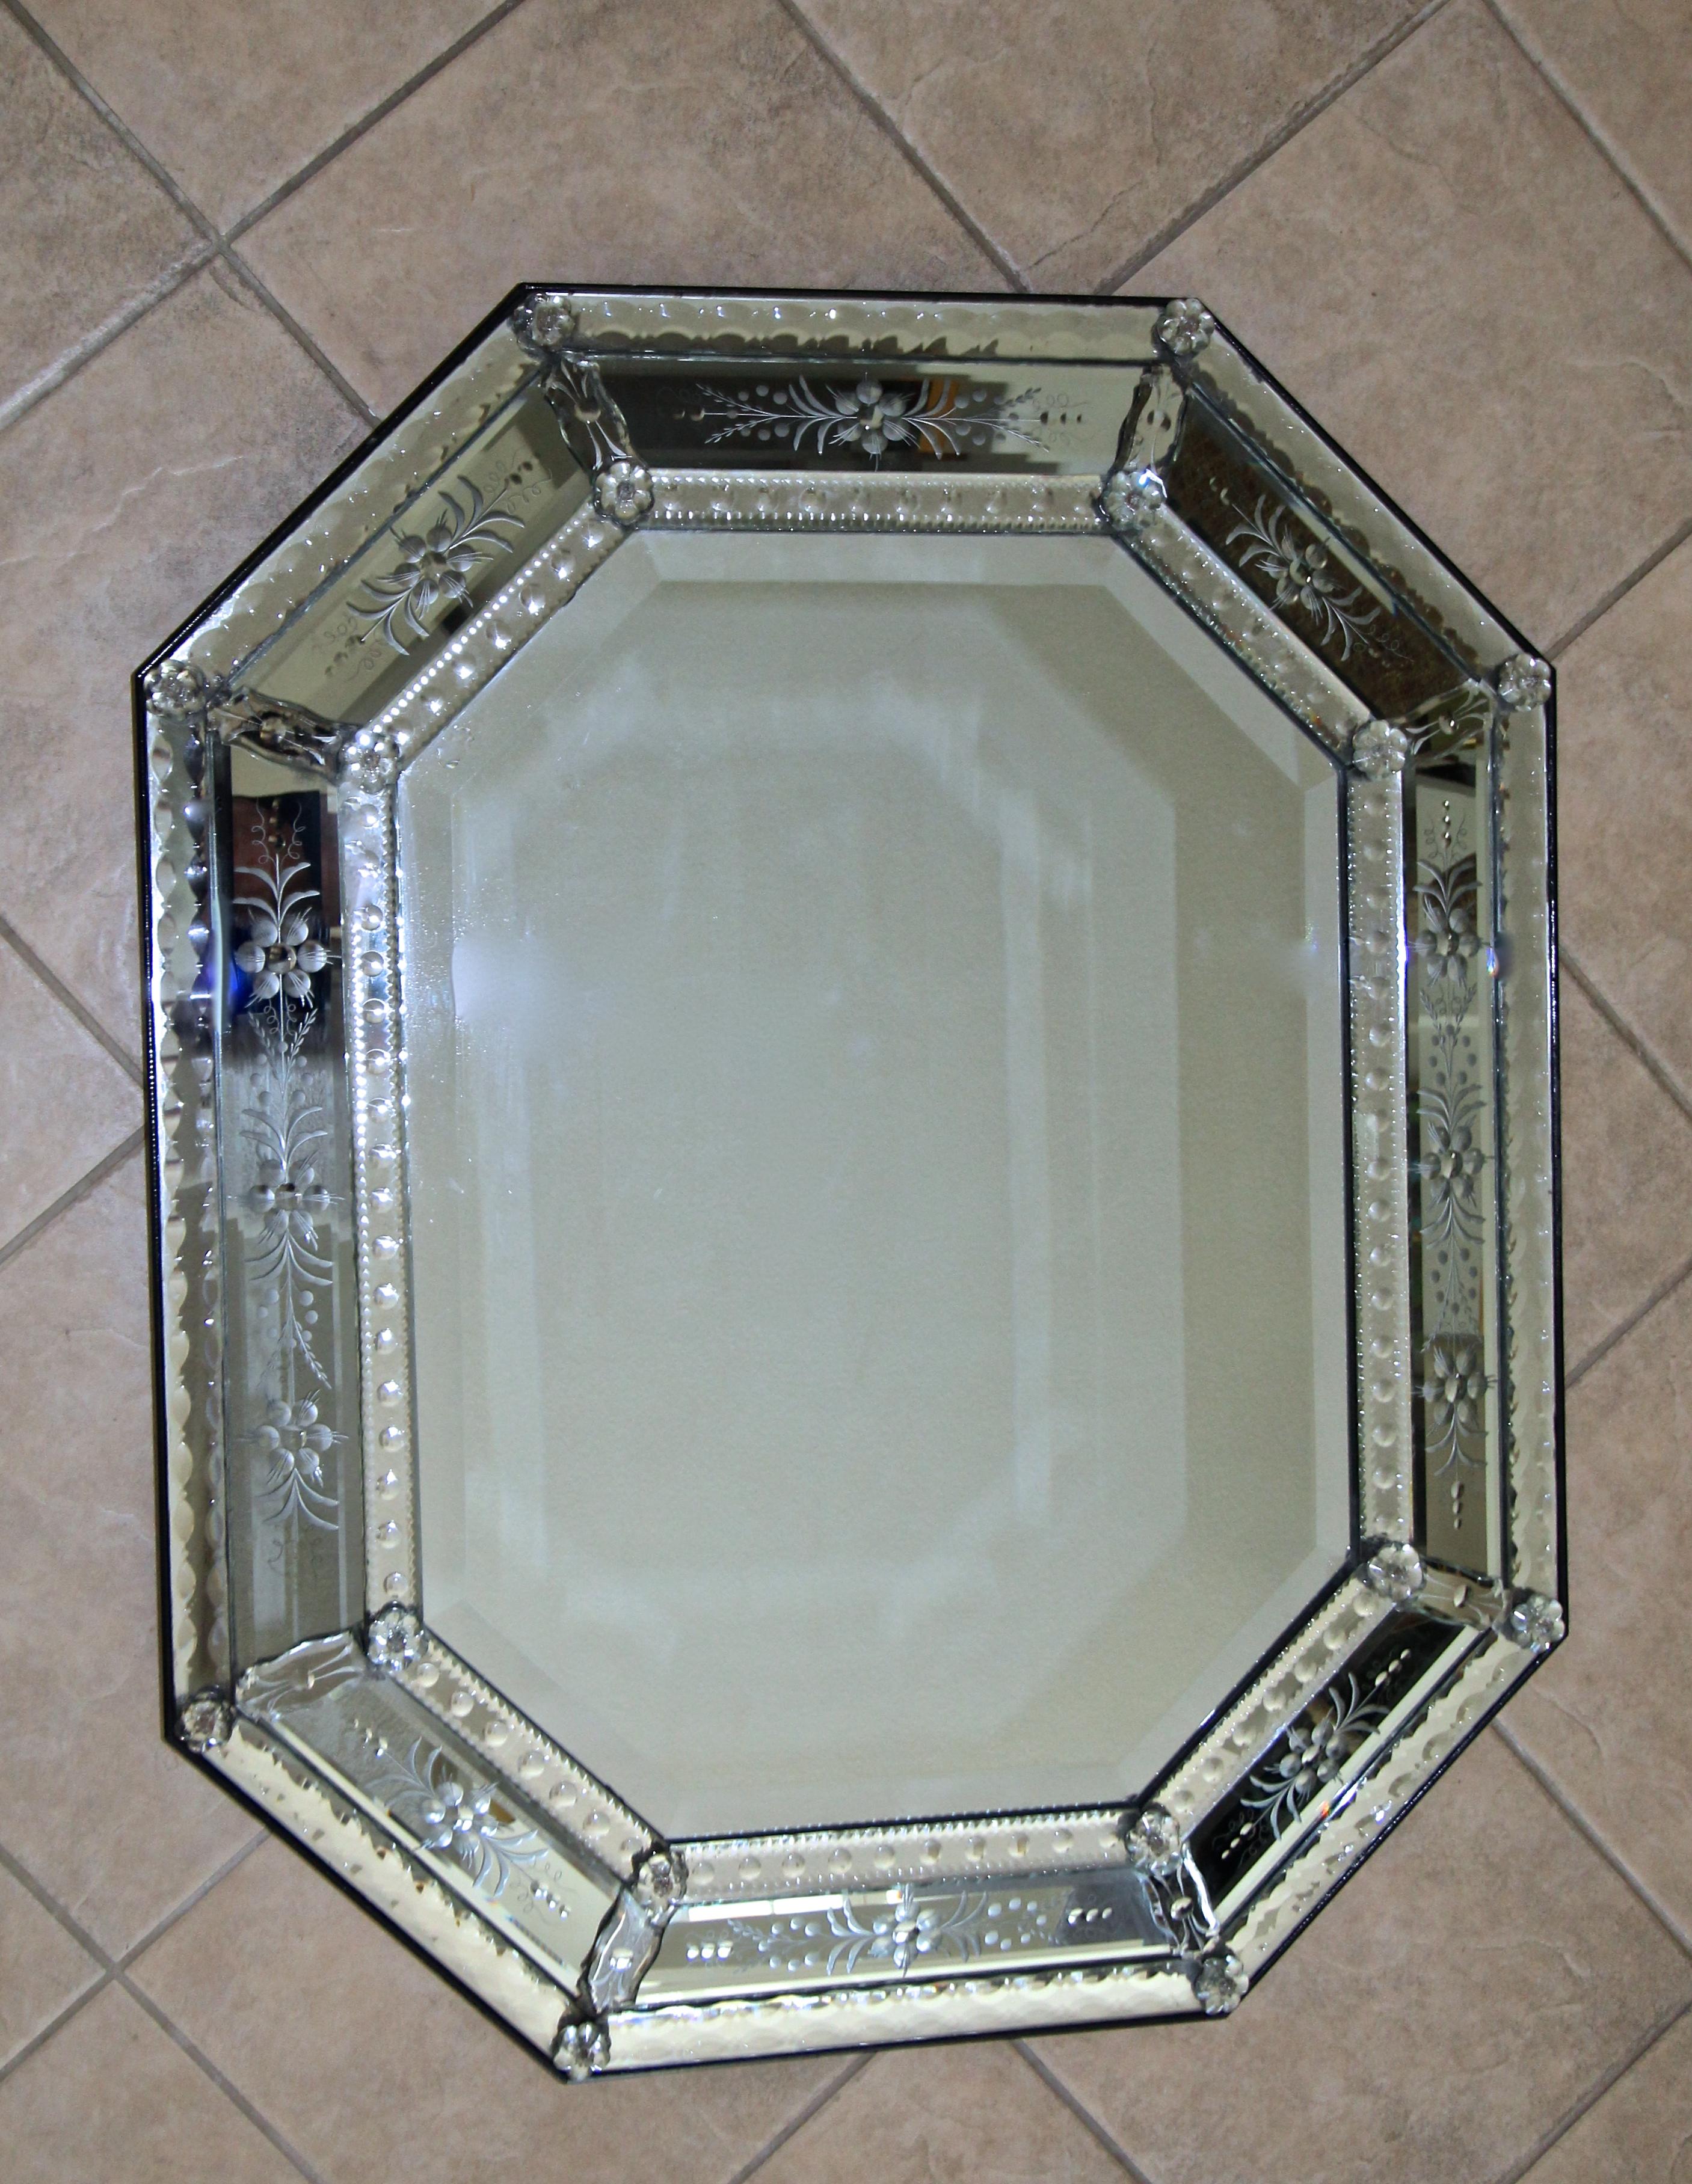 Very attractive 1940s octagonal Venetian Italian etched wall mirror. The mirror is expertly handcrafted revealing numerous intricate etched flower and scroll motif threw out. The large inner mirror is beveled, the outer panels have lots of finely